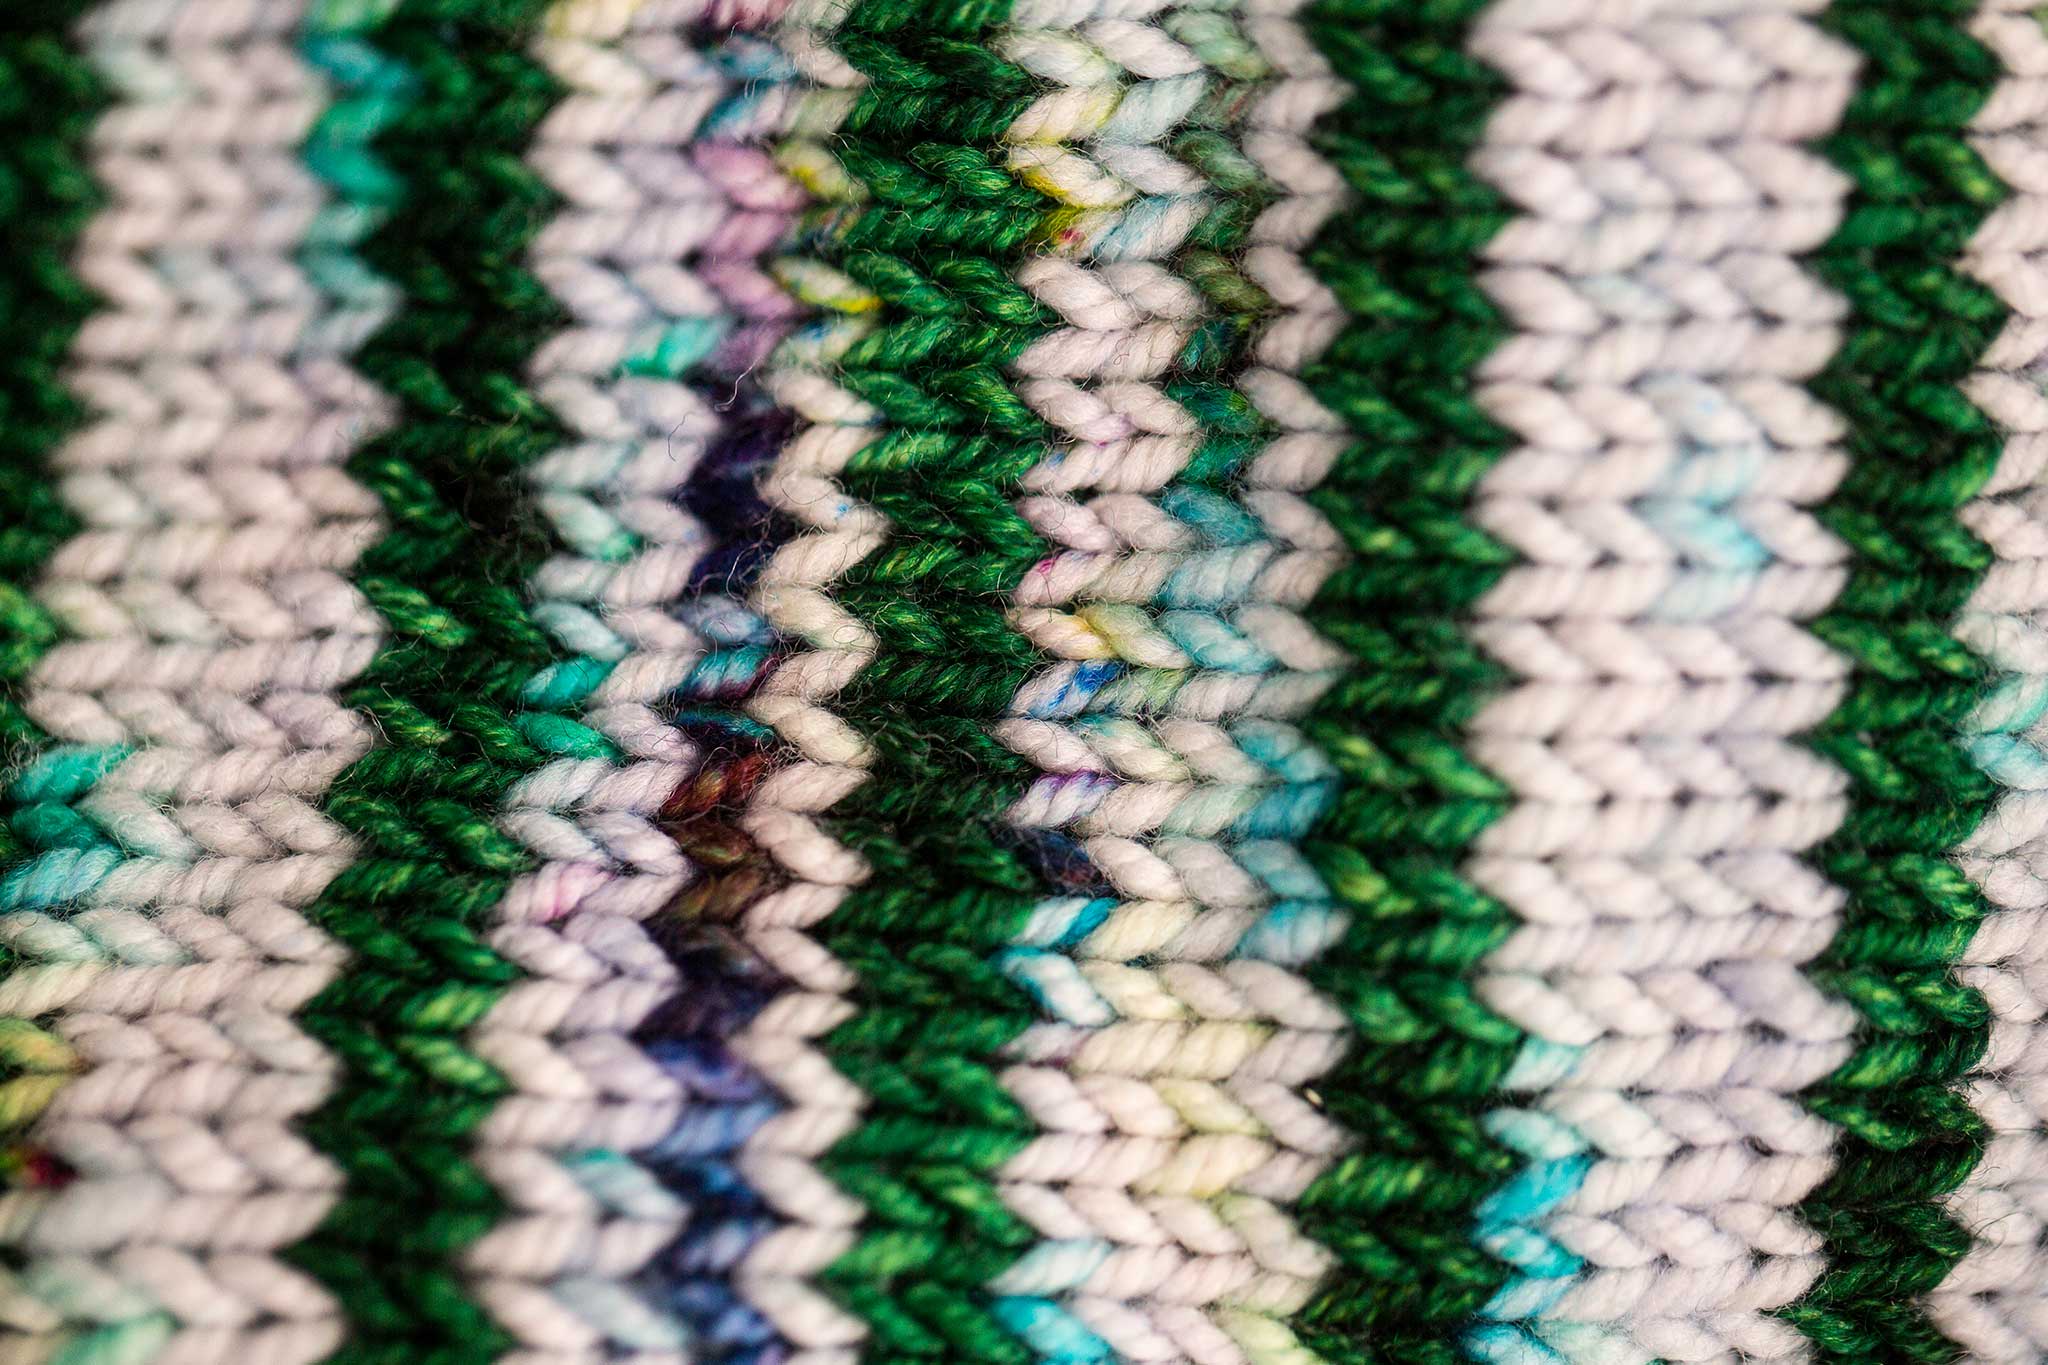 Close-up of a knitted work of art; white, blues, purples and greens are amongst the colors.